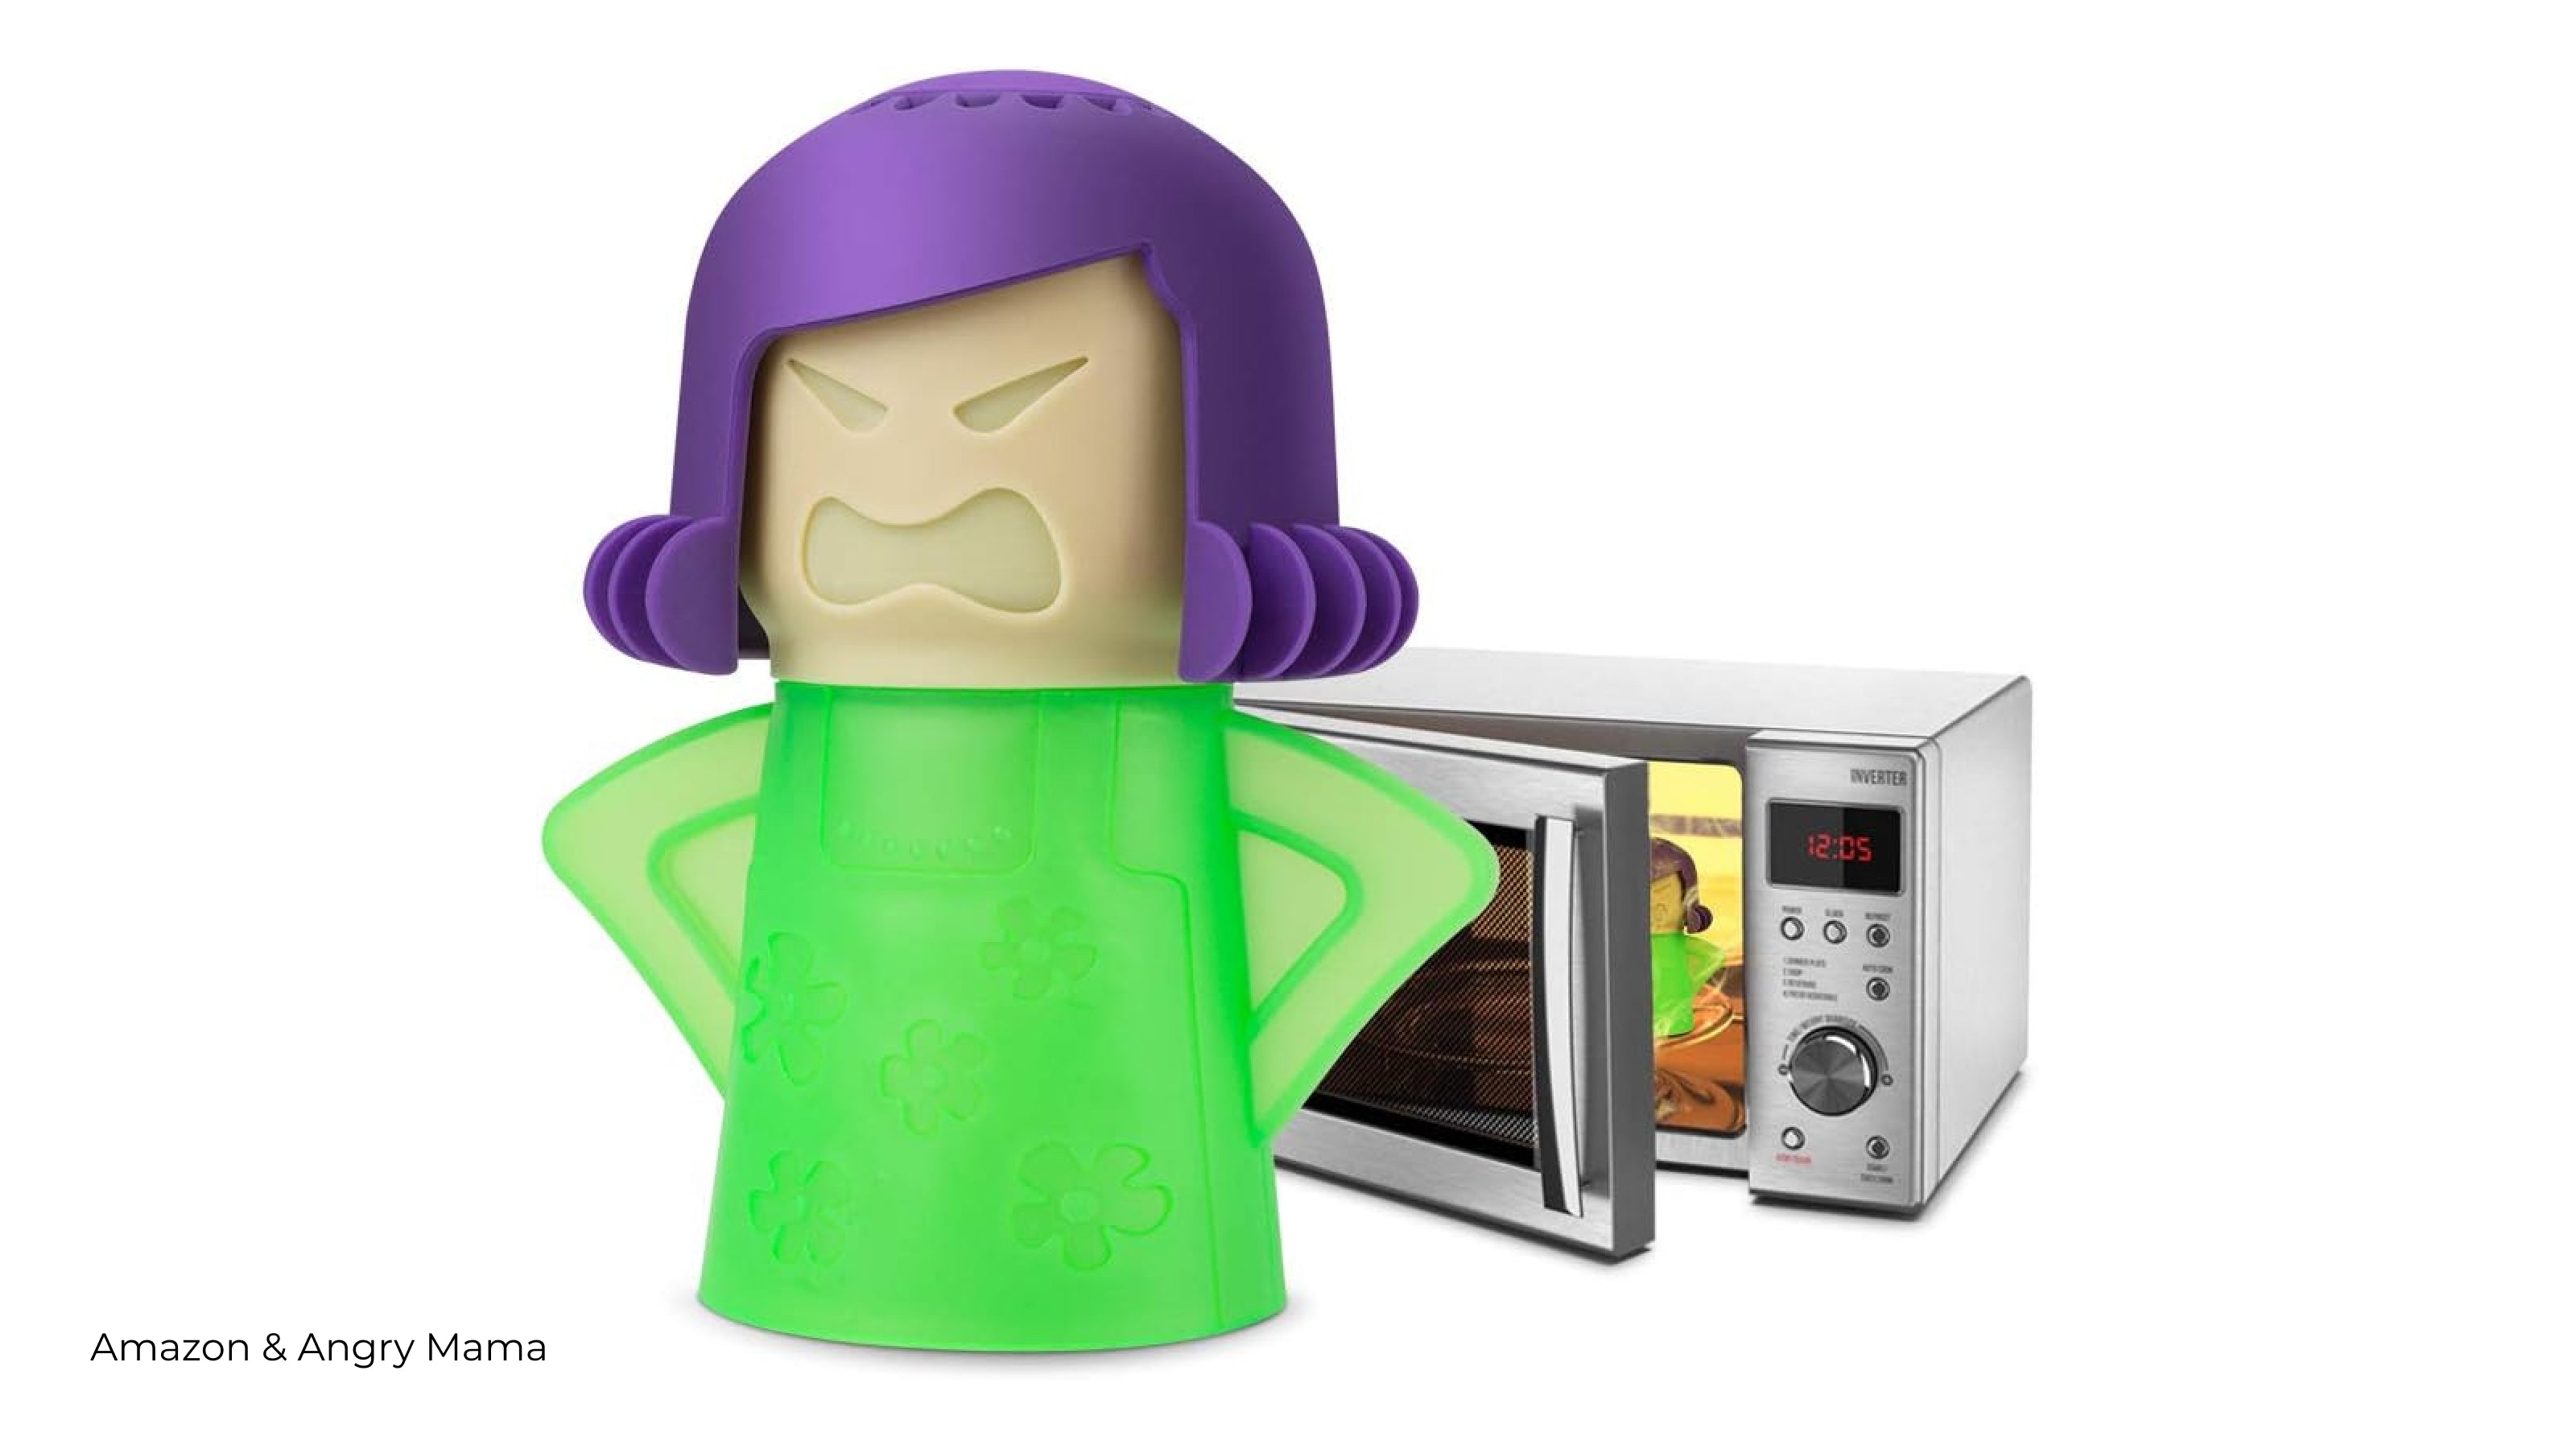 Angry Mama microwave cleare next to a small microwave on a white background